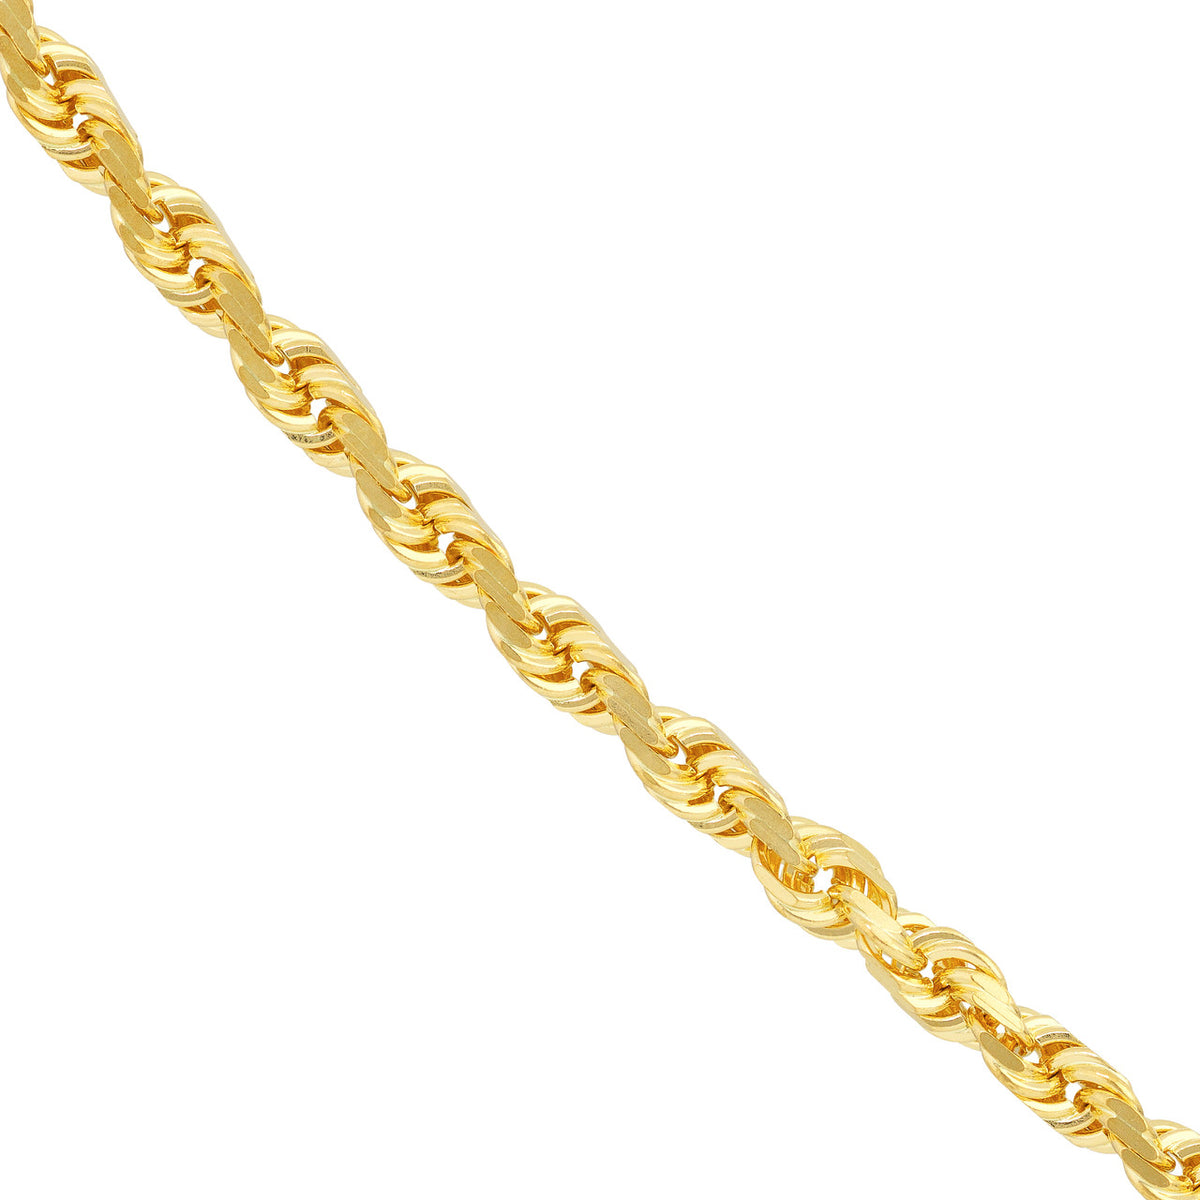 Solid 14K Gold 3.8mm D/C Rope Chain Necklace with Lobster Lock